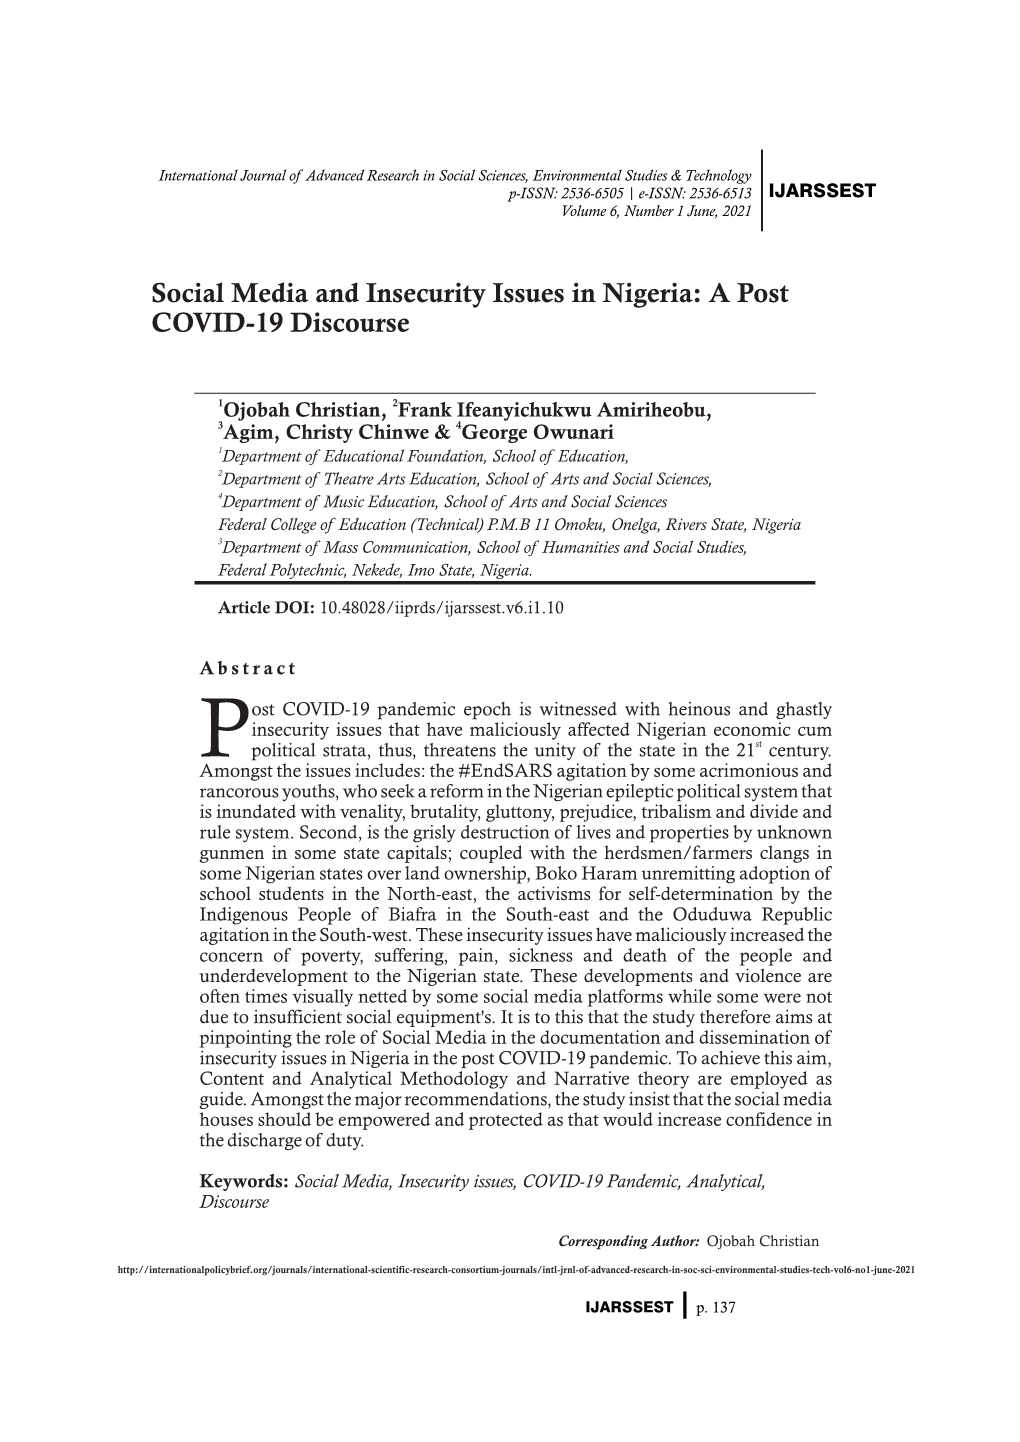 Social Media and Insecurity Issues in Nigeria: a Post COVID-19 Discourse